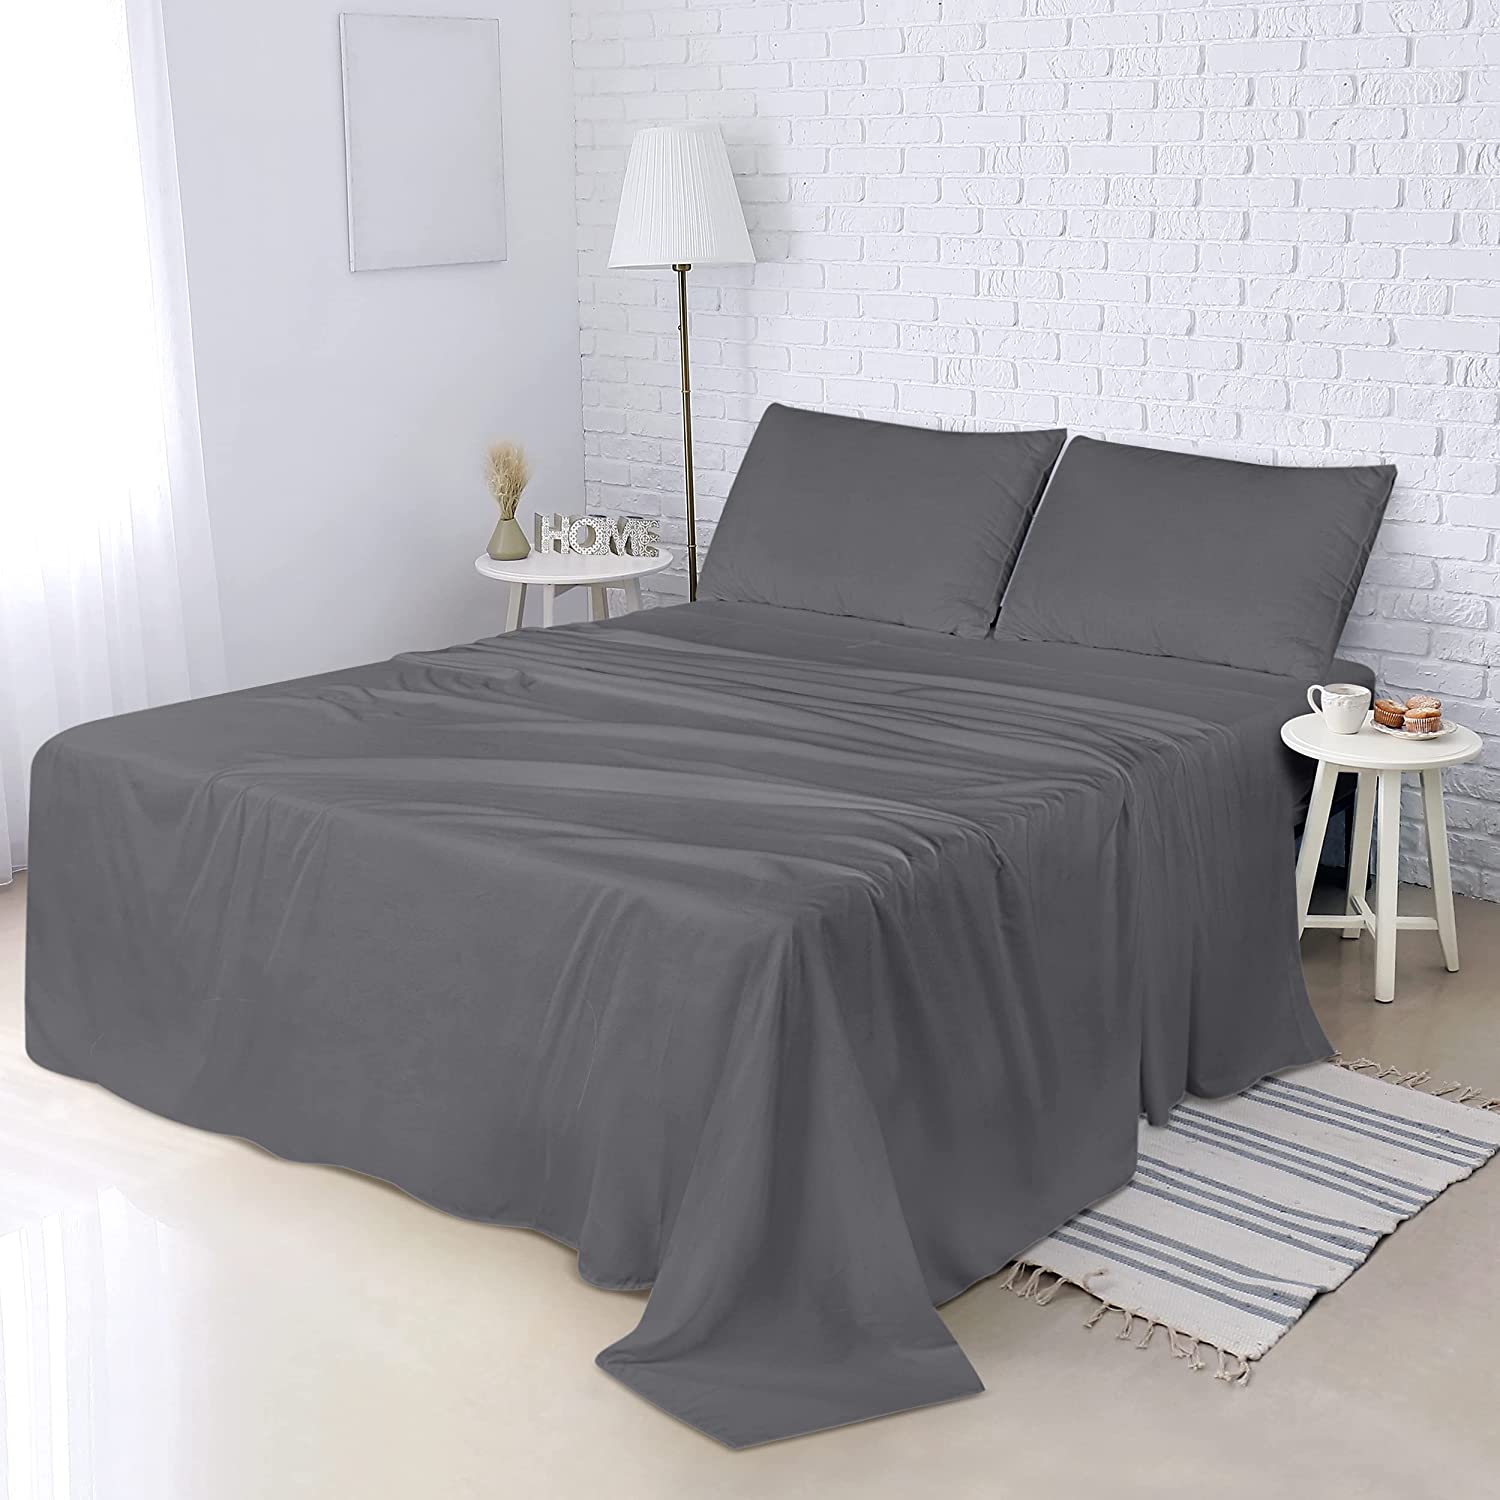 Utopia Bedding Full Bed Sheets Set - 4 Piece Bedding - Brushed Microfiber -  Shrinkage and Fade Resistant - Easy Care (Full, Grey)